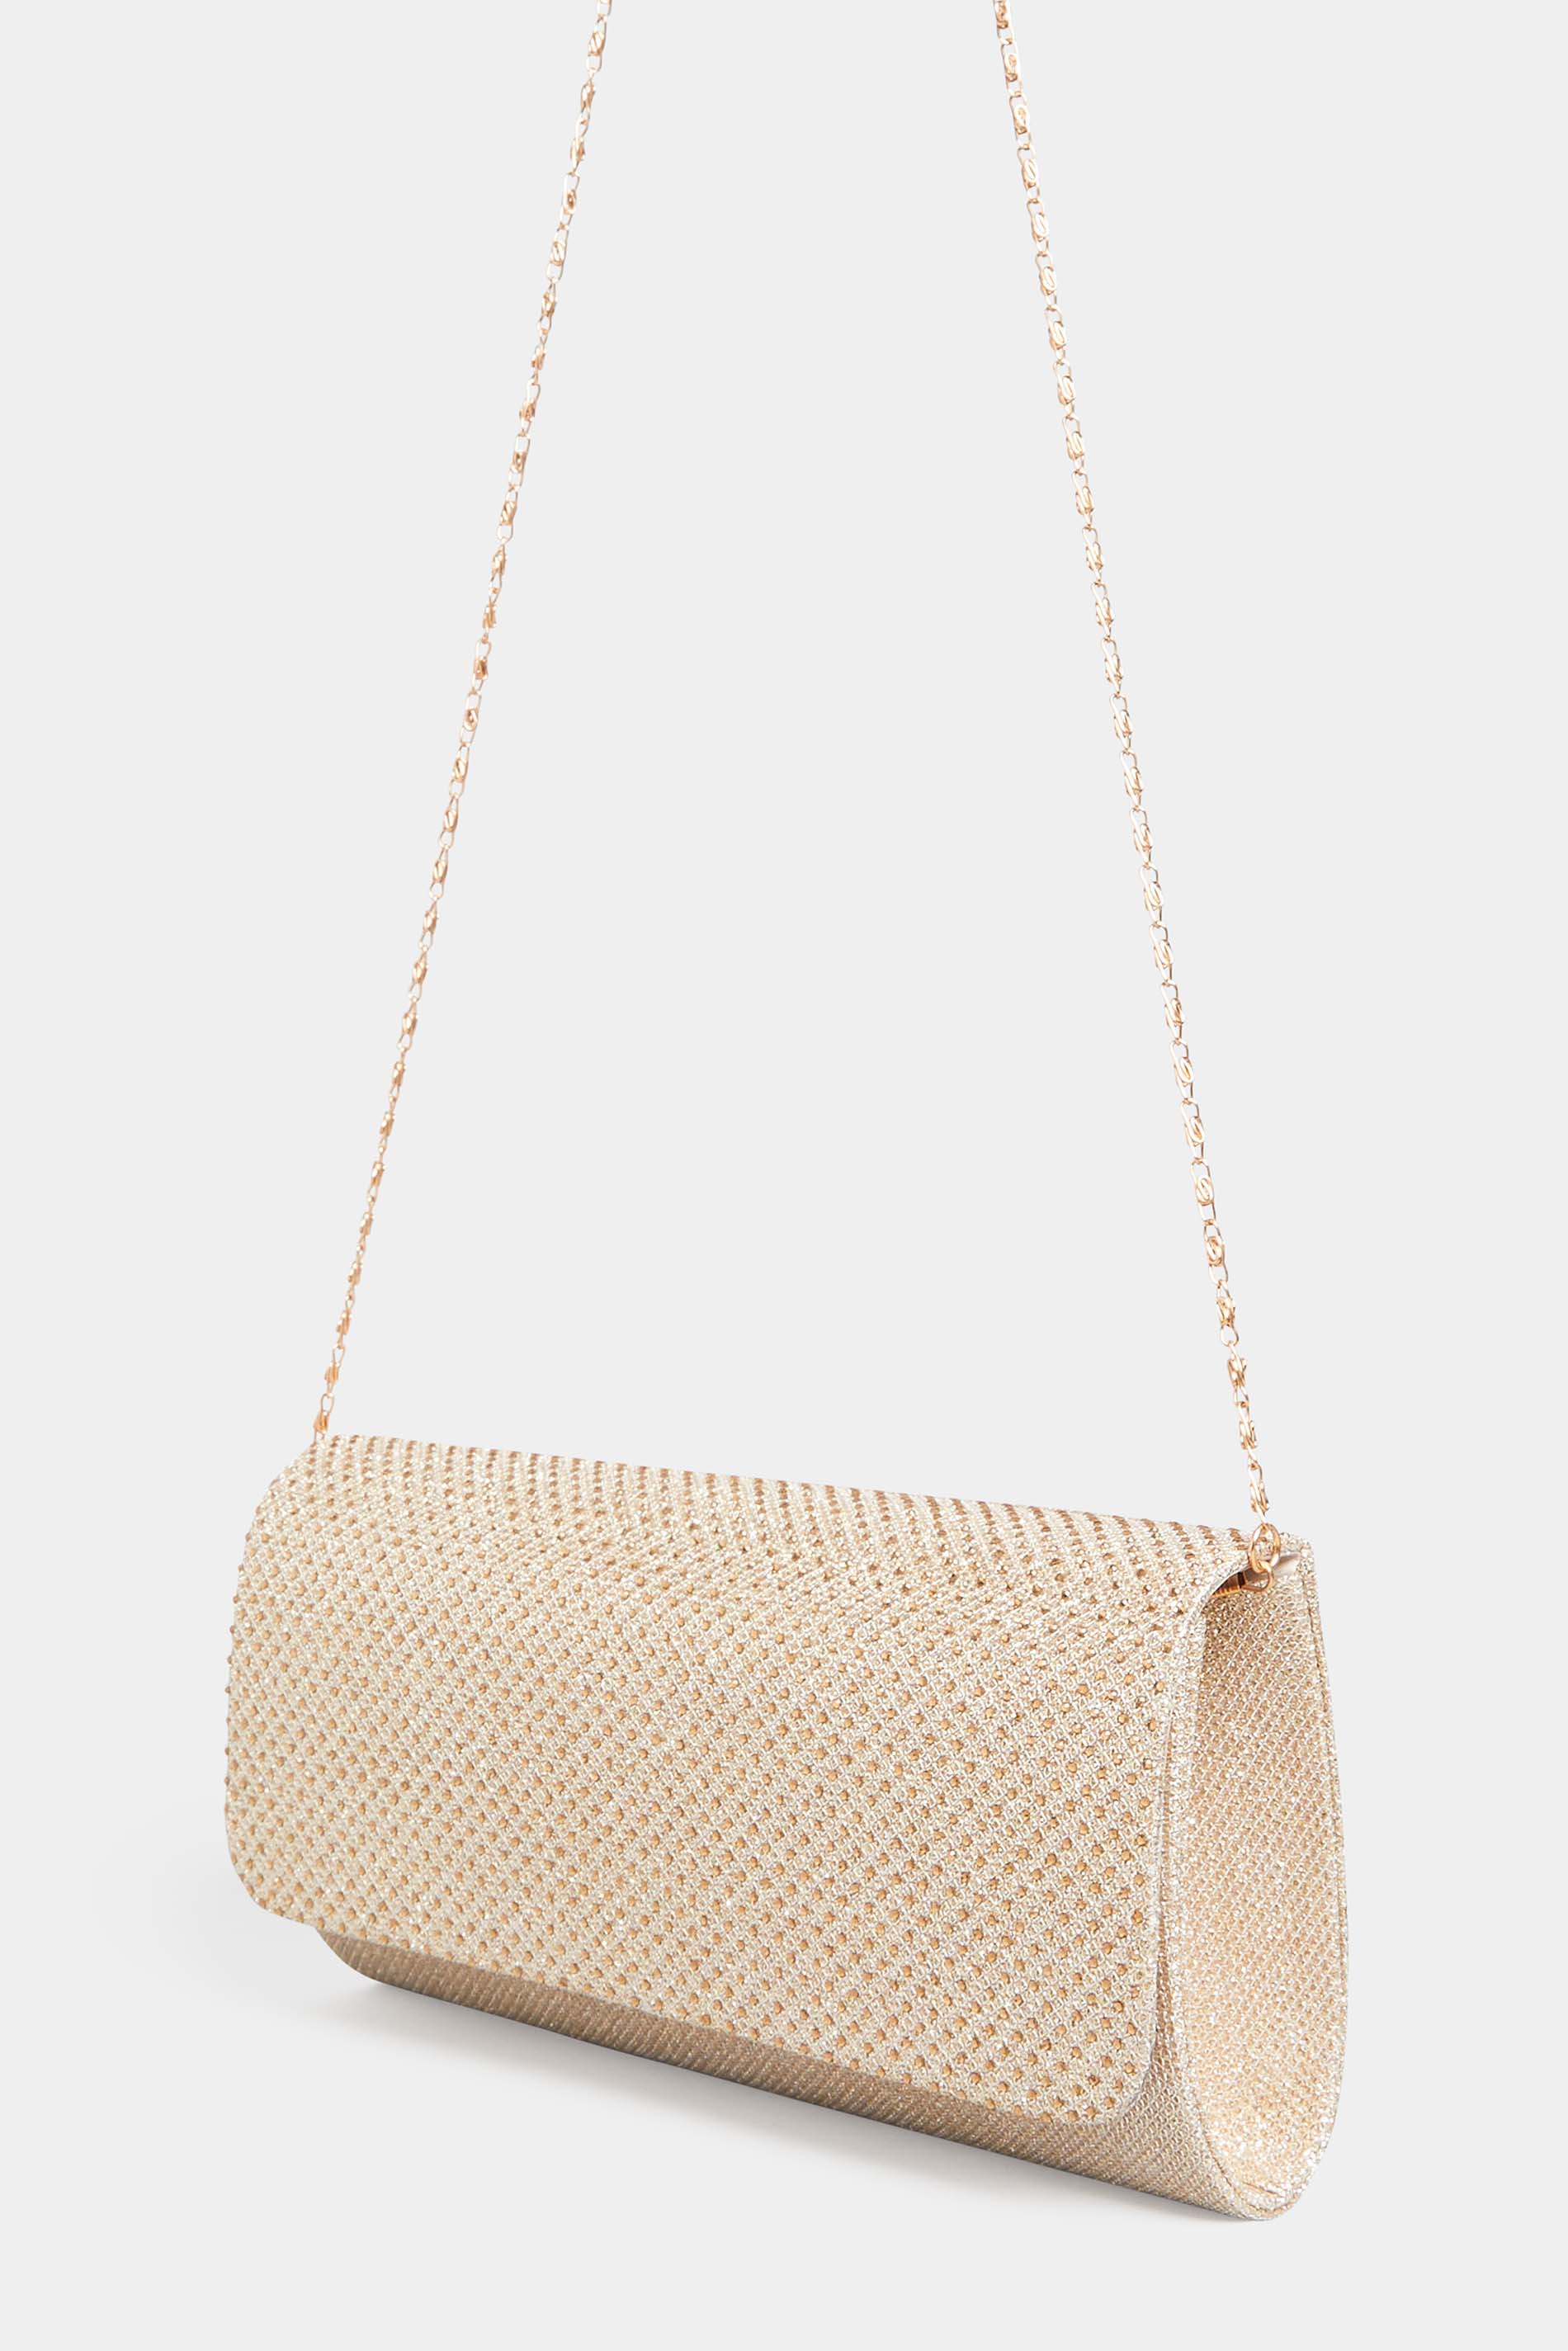 Rose Gold Diamante Clutch Bag | Yours Clothing 2